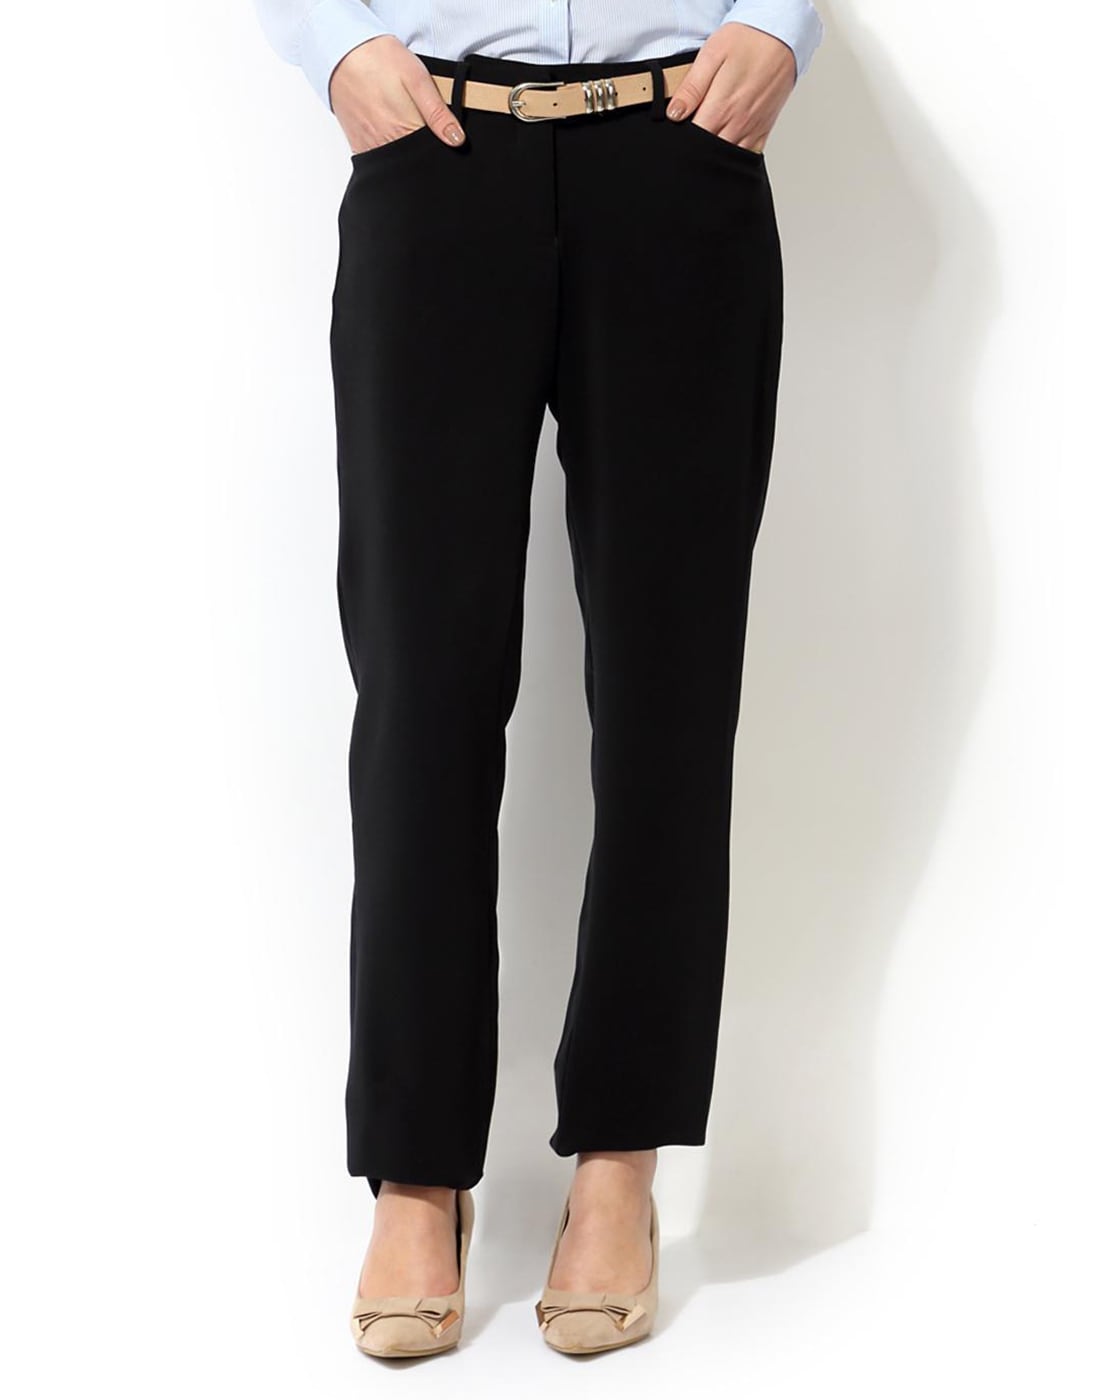 Allen Solly Woman Trousers & Leggings, Allen Solly Cream Trousers for Women  at Allensolly.com